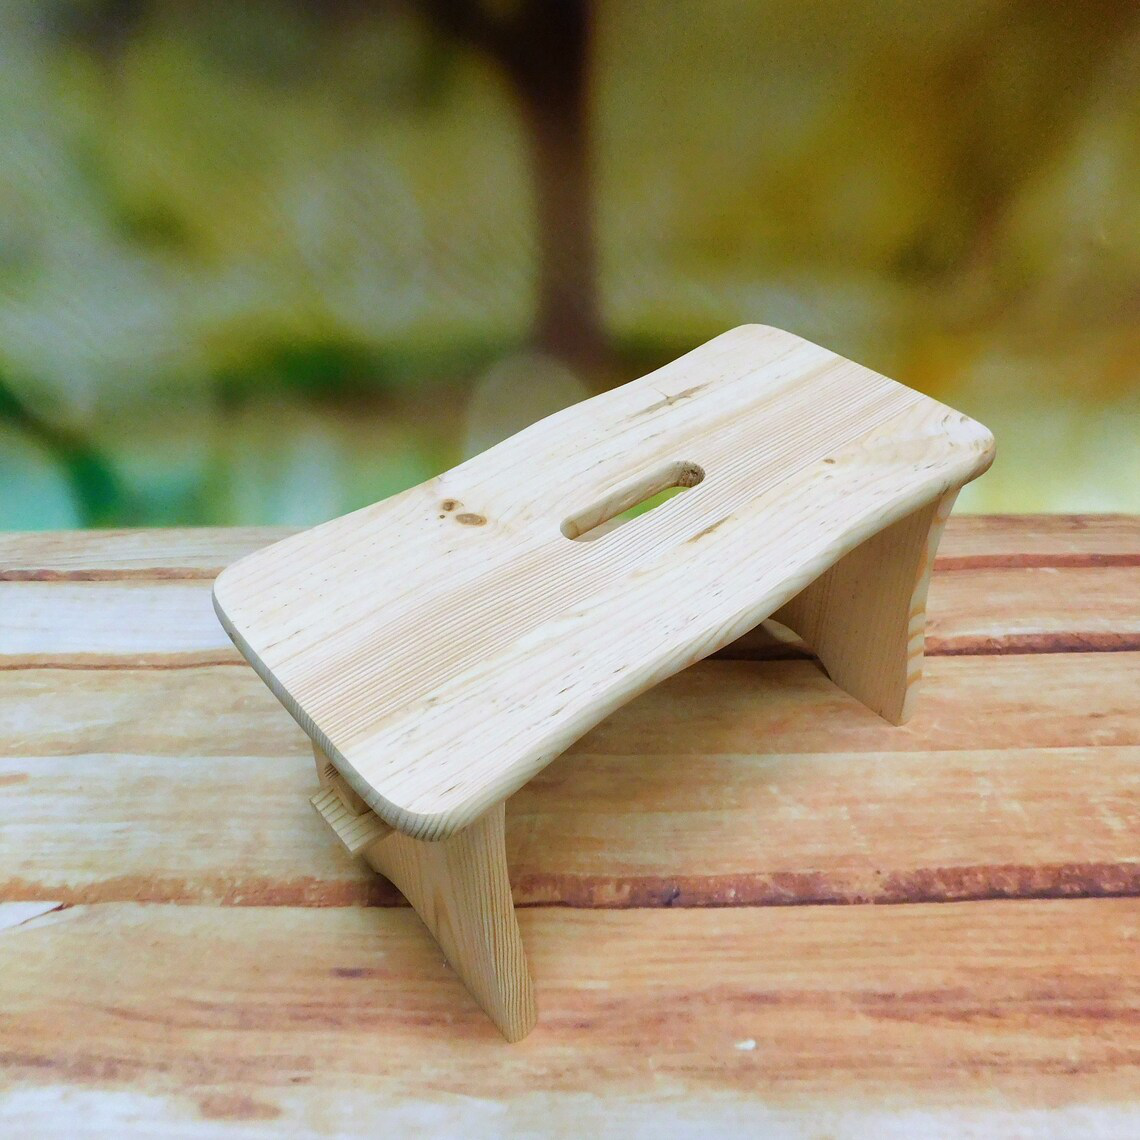 Plain Wooden Childrens Chair - Top View